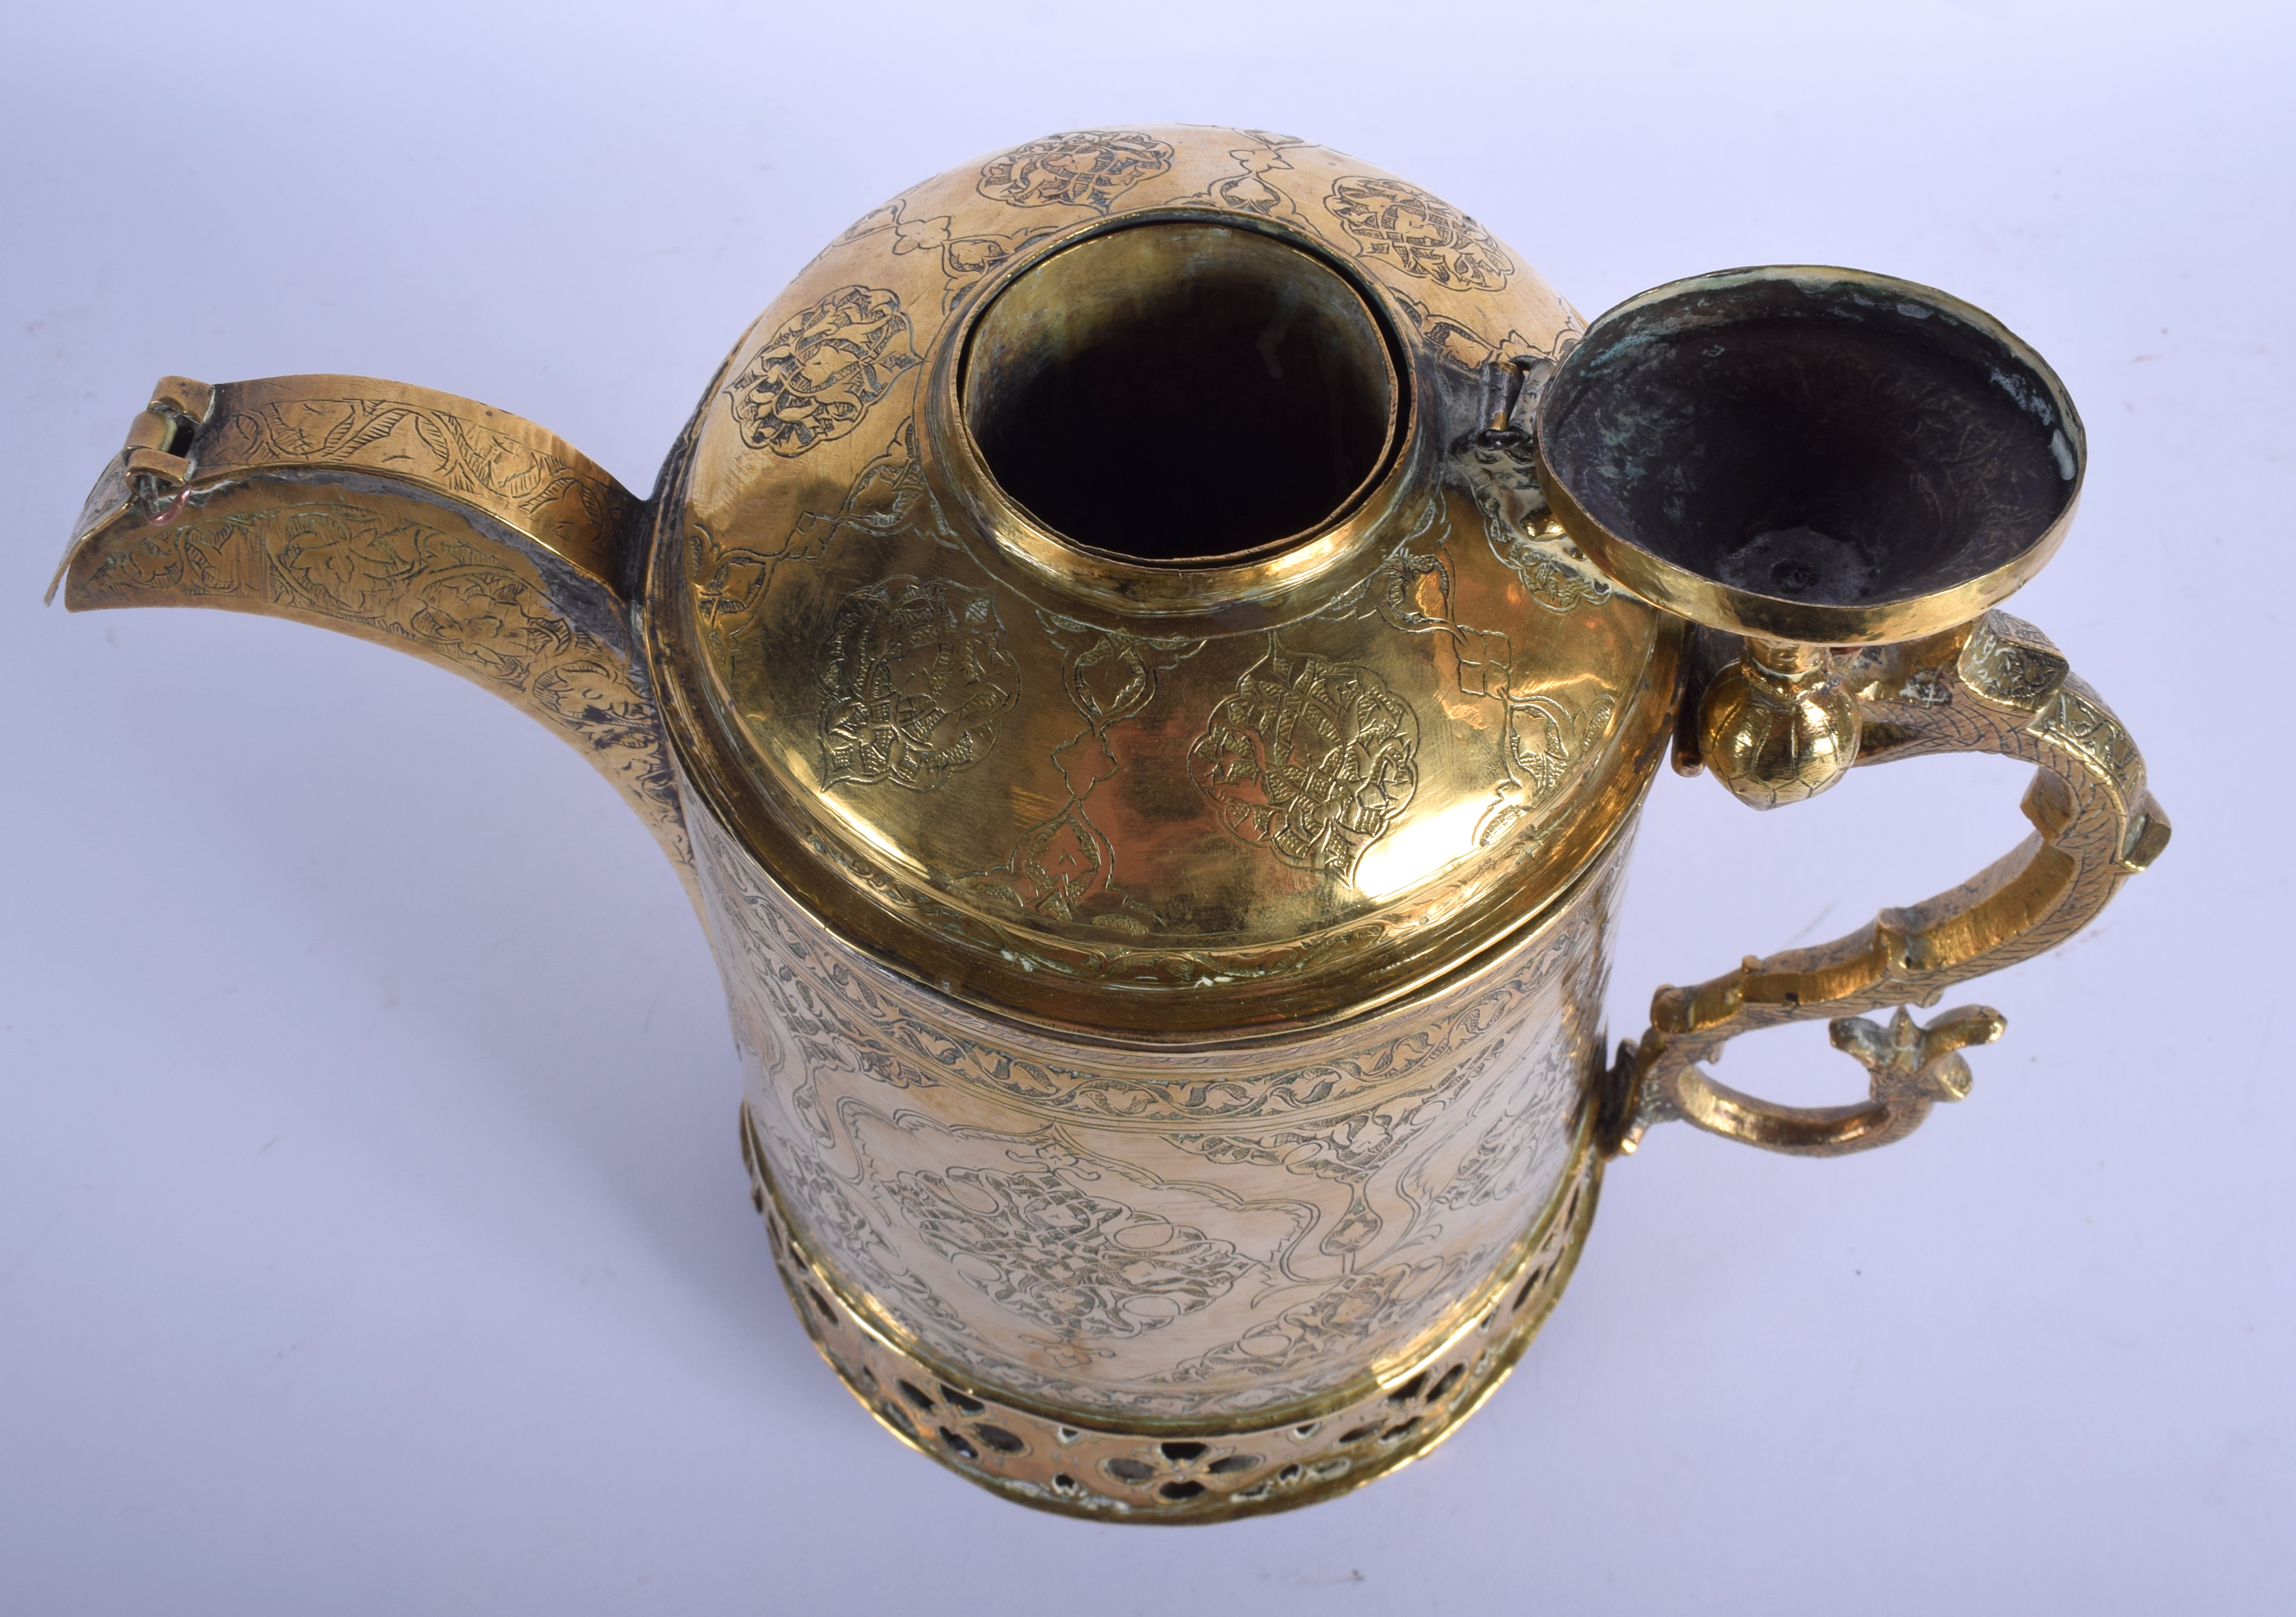 A LARGE 19TH CENTURY MIDDLE EASTERN BRASS KUFIC EWER decorated with foliage and vines. 30 cm x 22 c - Image 4 of 12